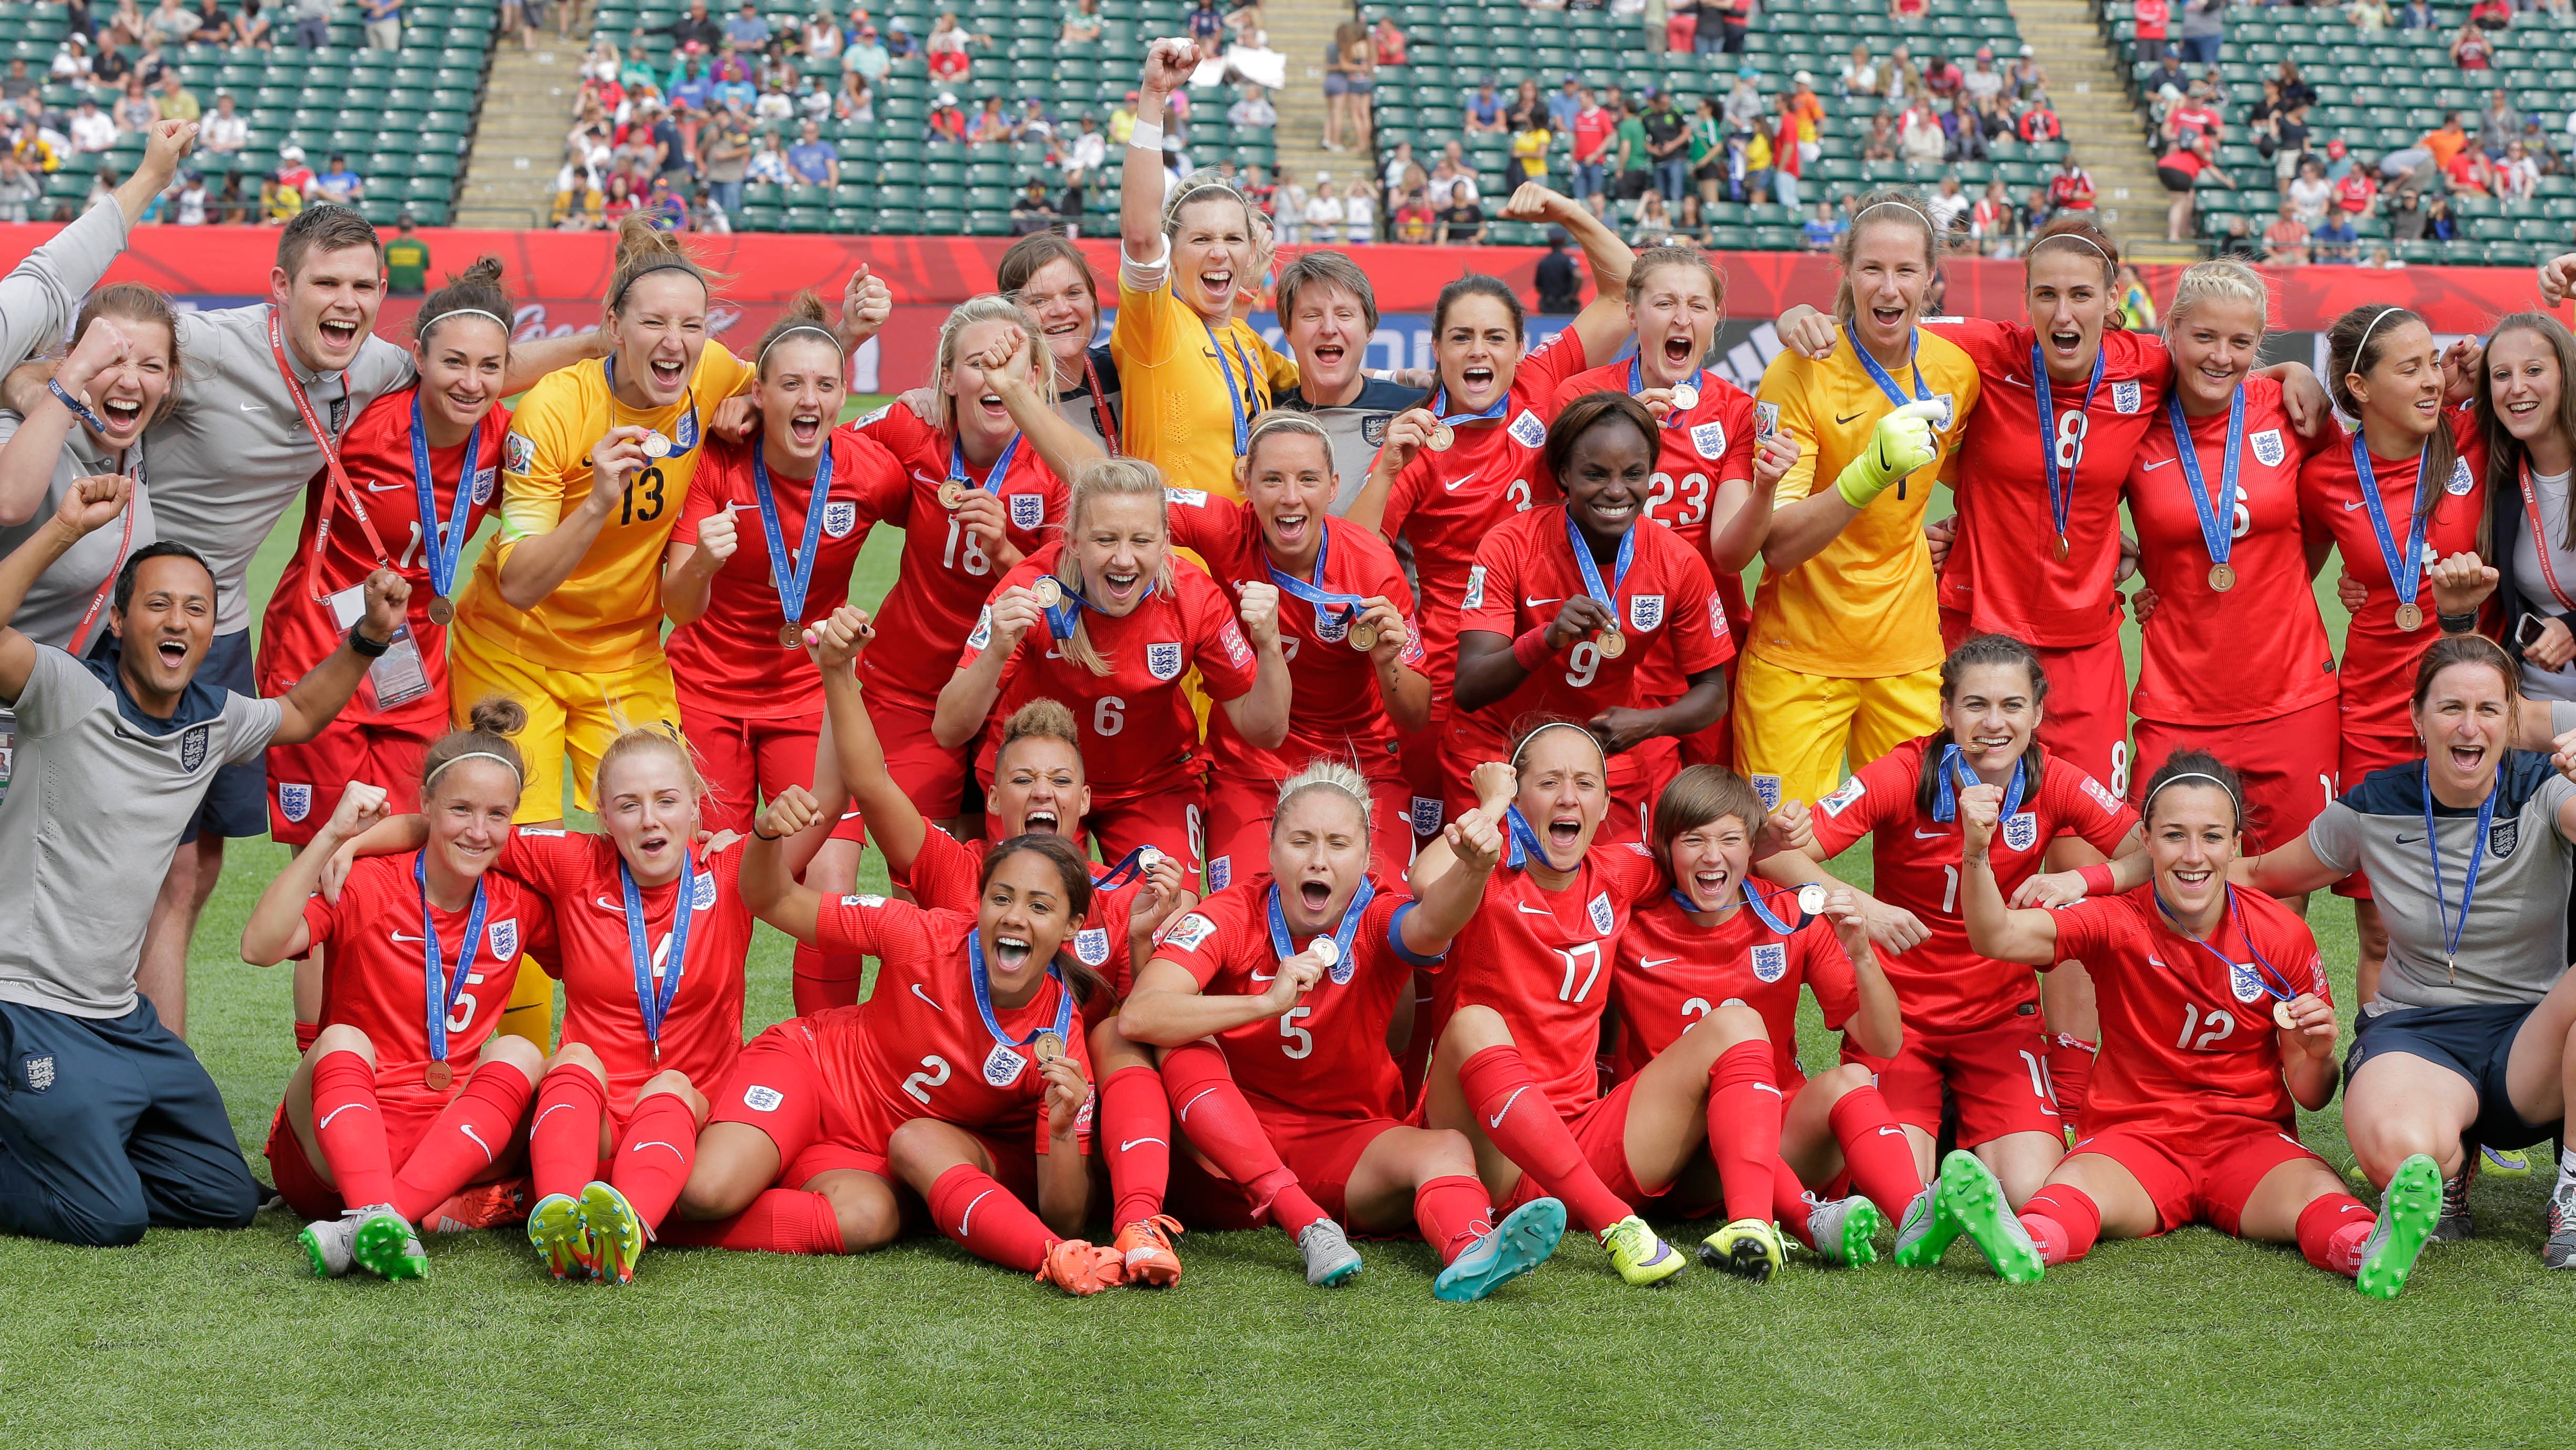 'We're buzzing' England celebrate finishing third in Women's World Cup